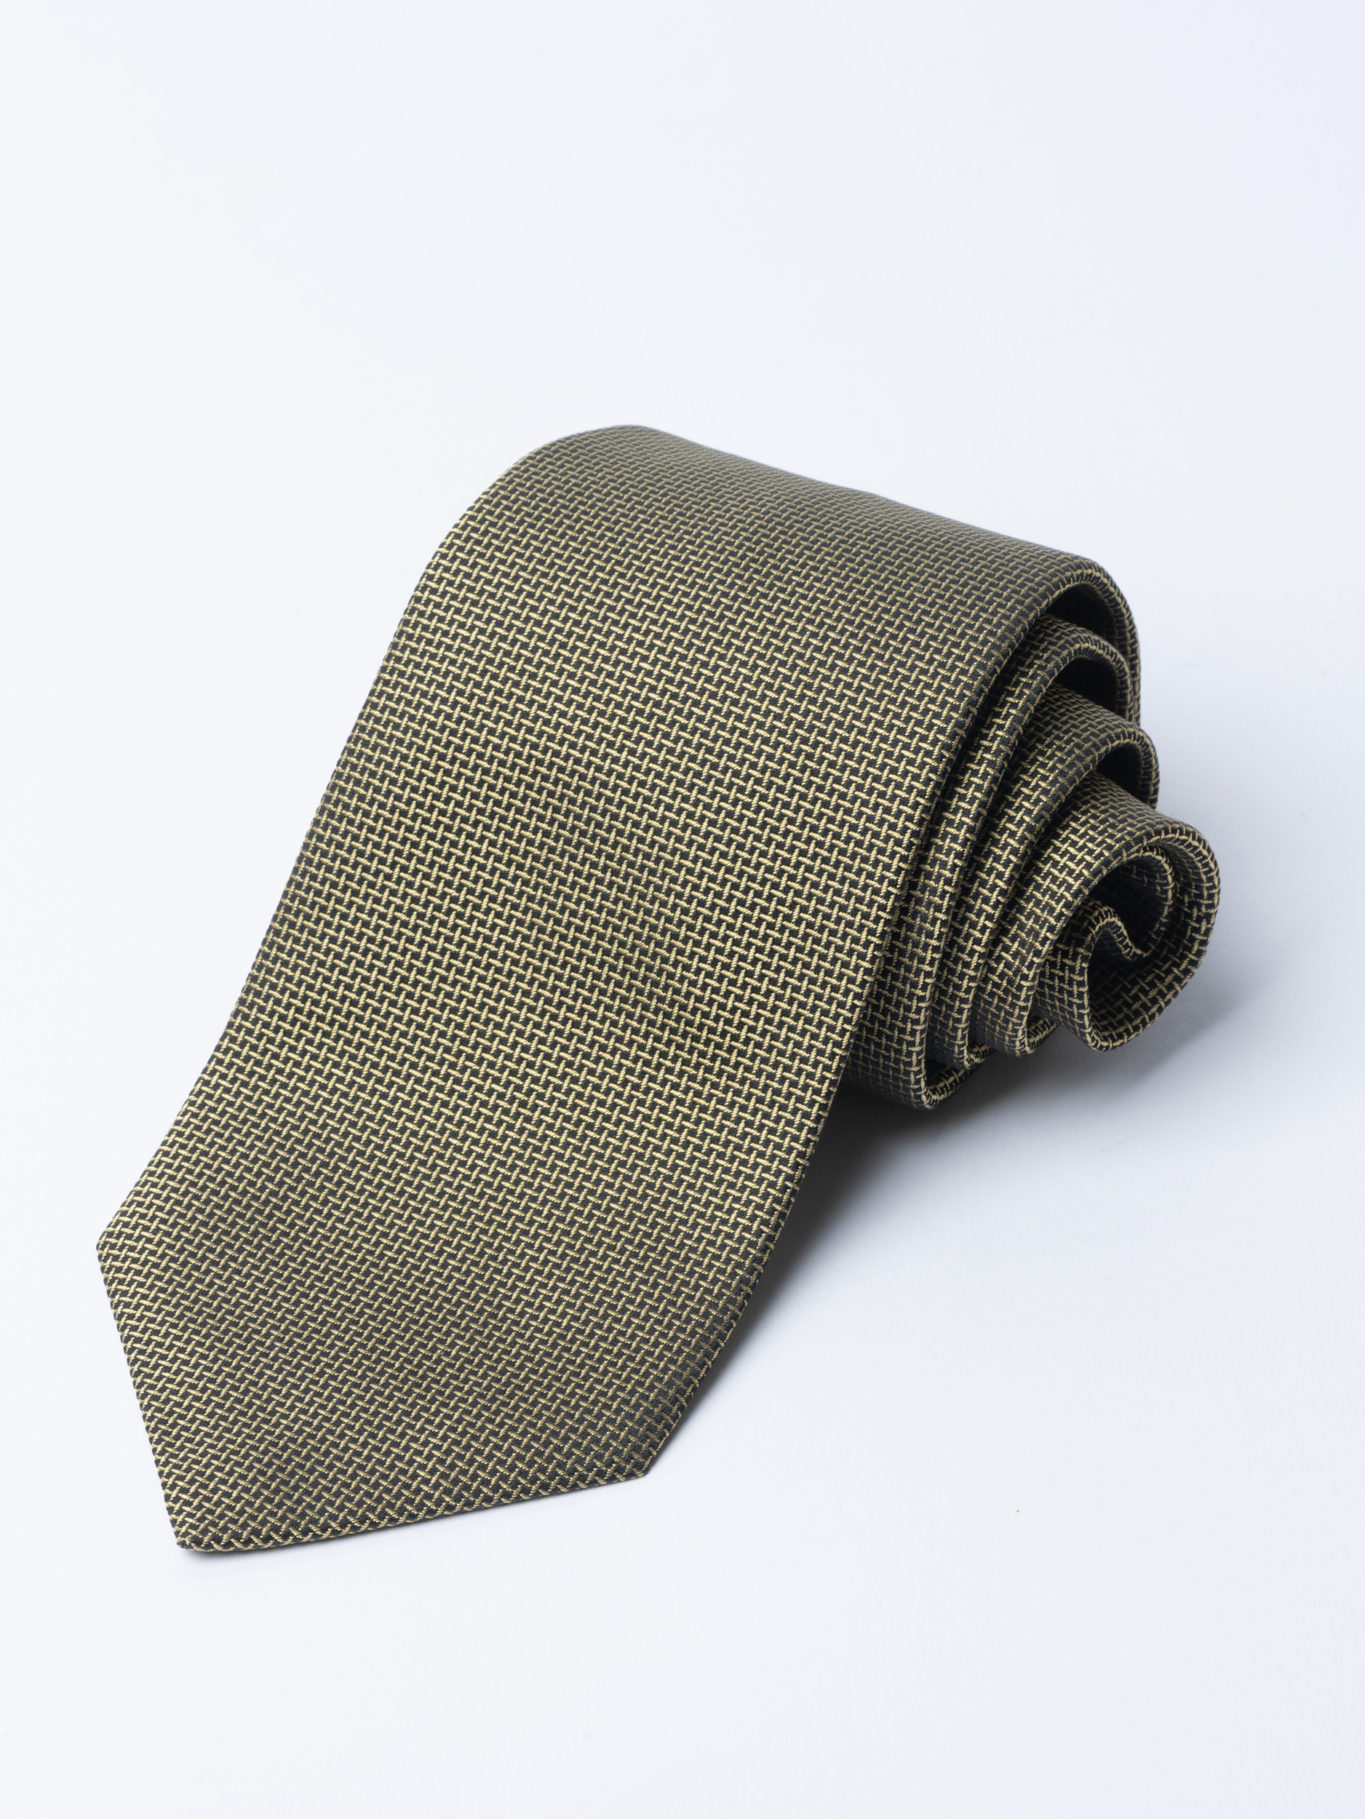 Yellow Cundey weave tie - Henry Poole Savile Row